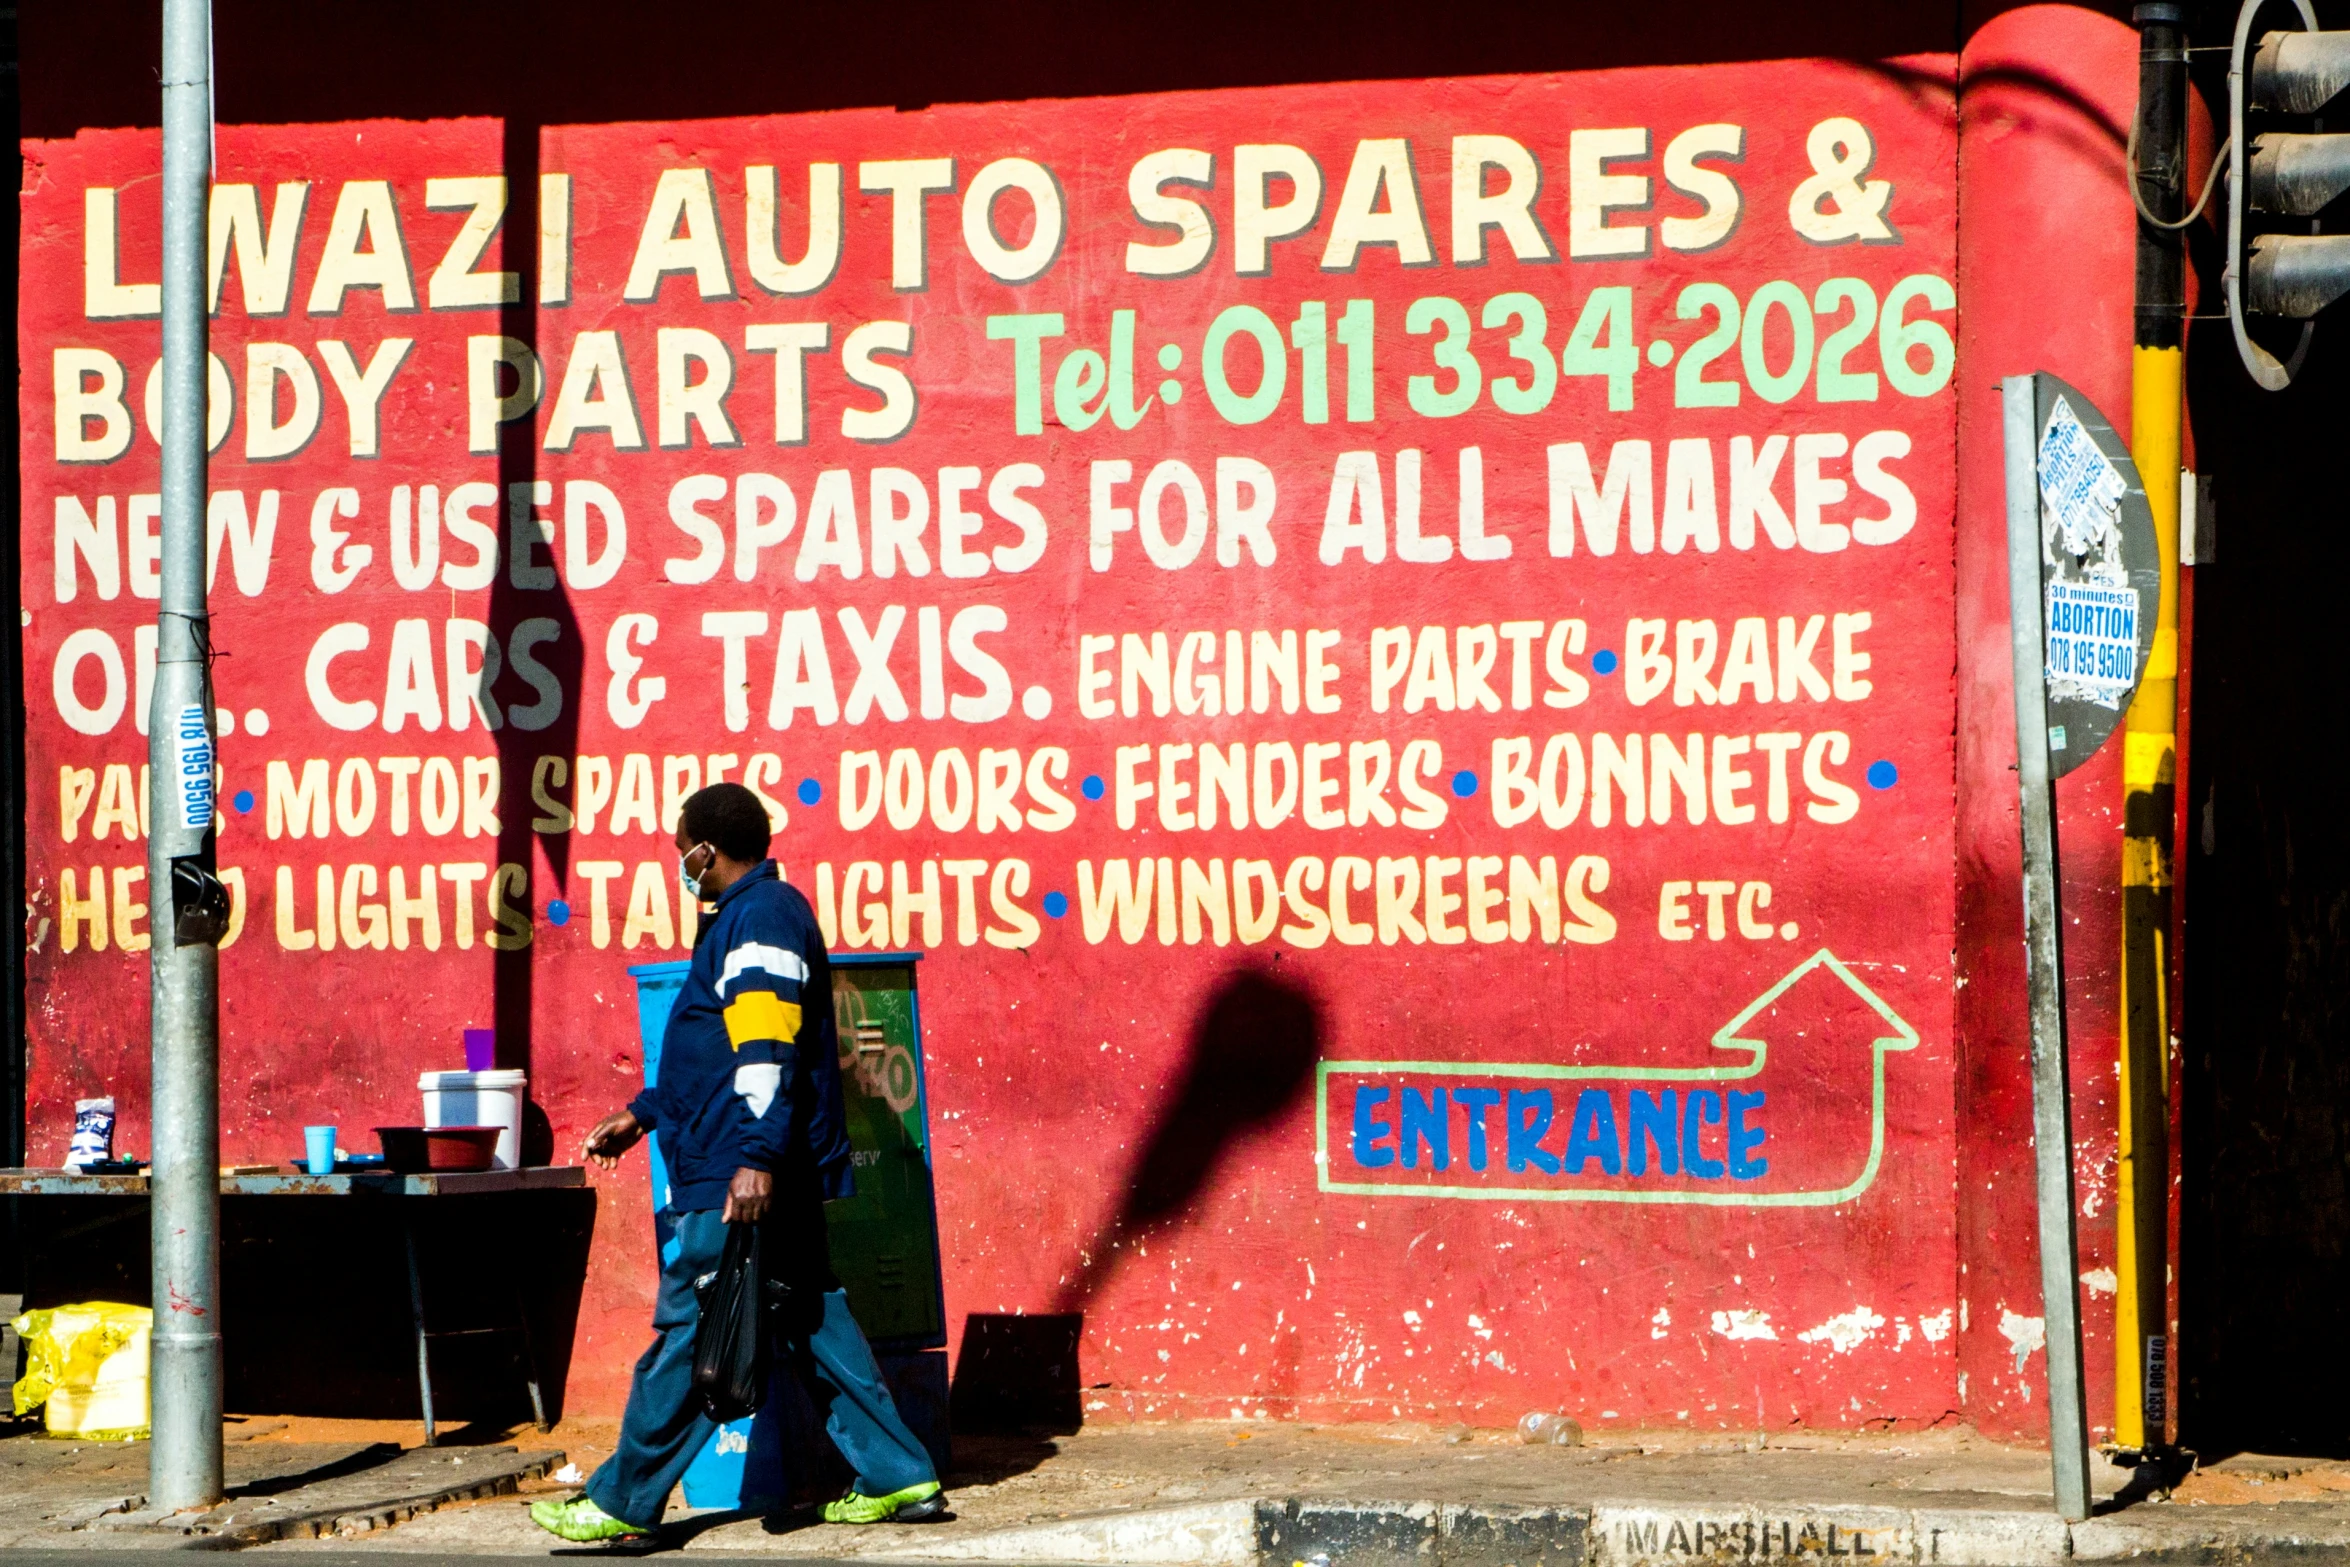 two young people walking past an advertit for auto parts